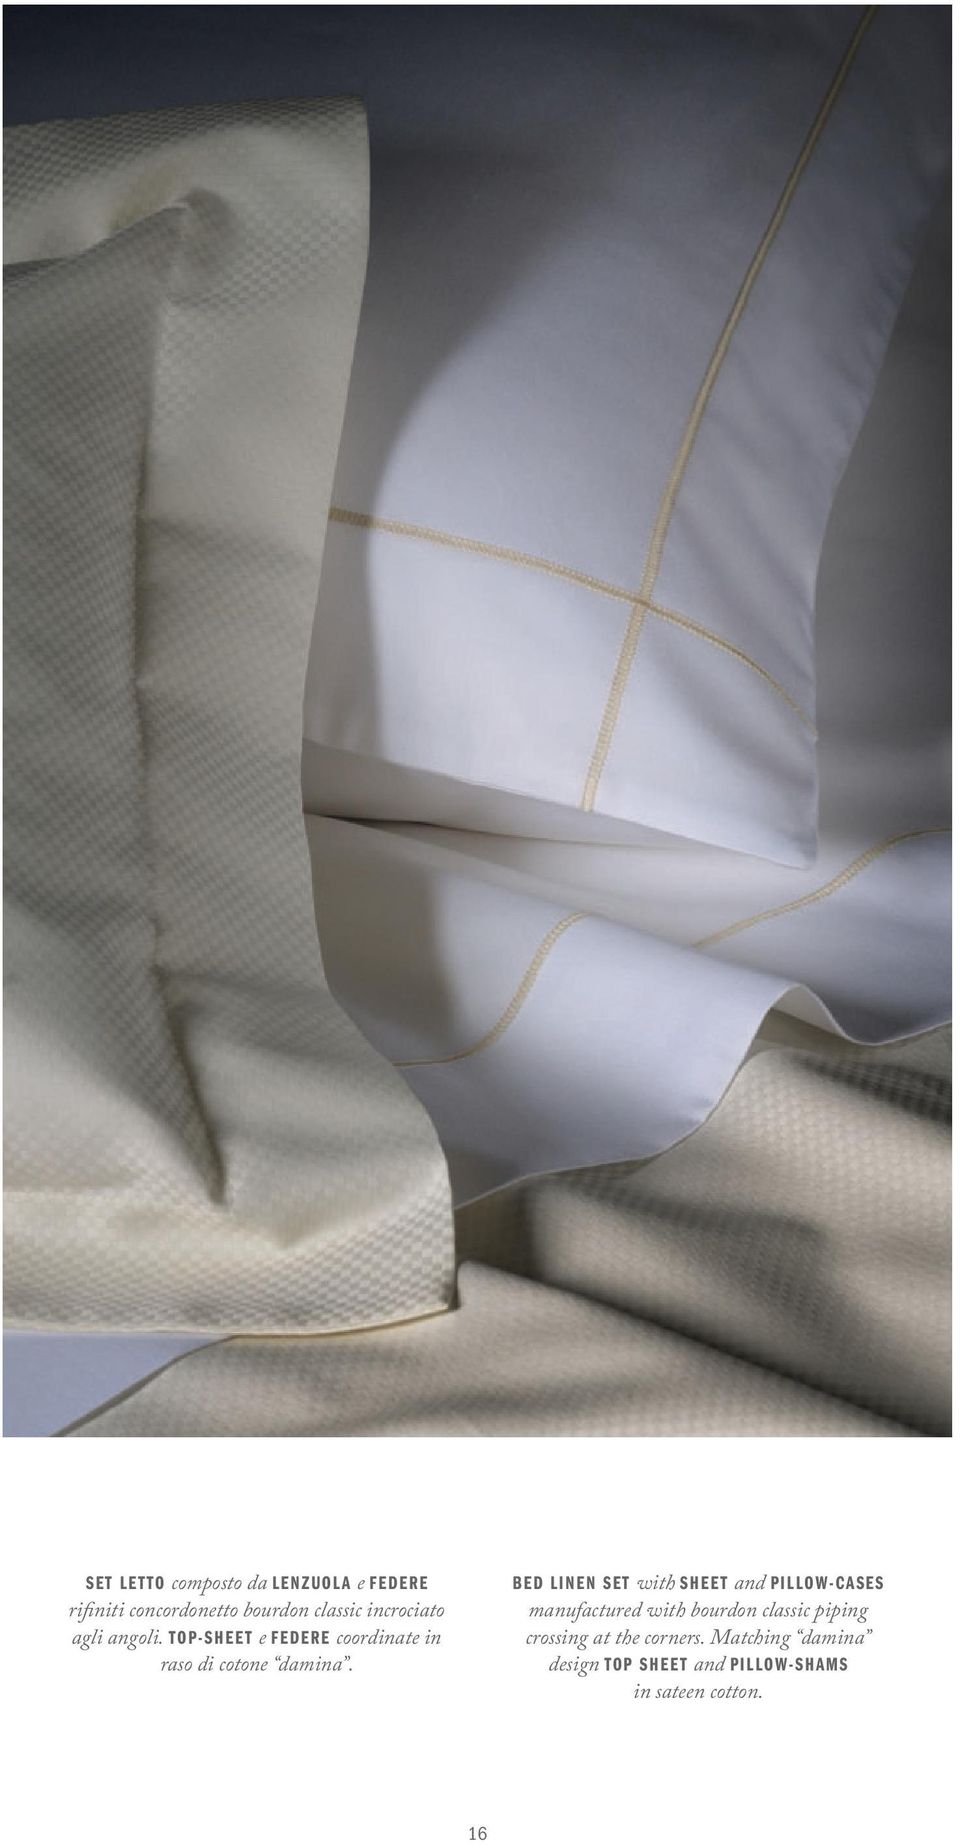 BED LINEN SET with SHEET and PILLOW-CASES manufactured with bourdon classic piping